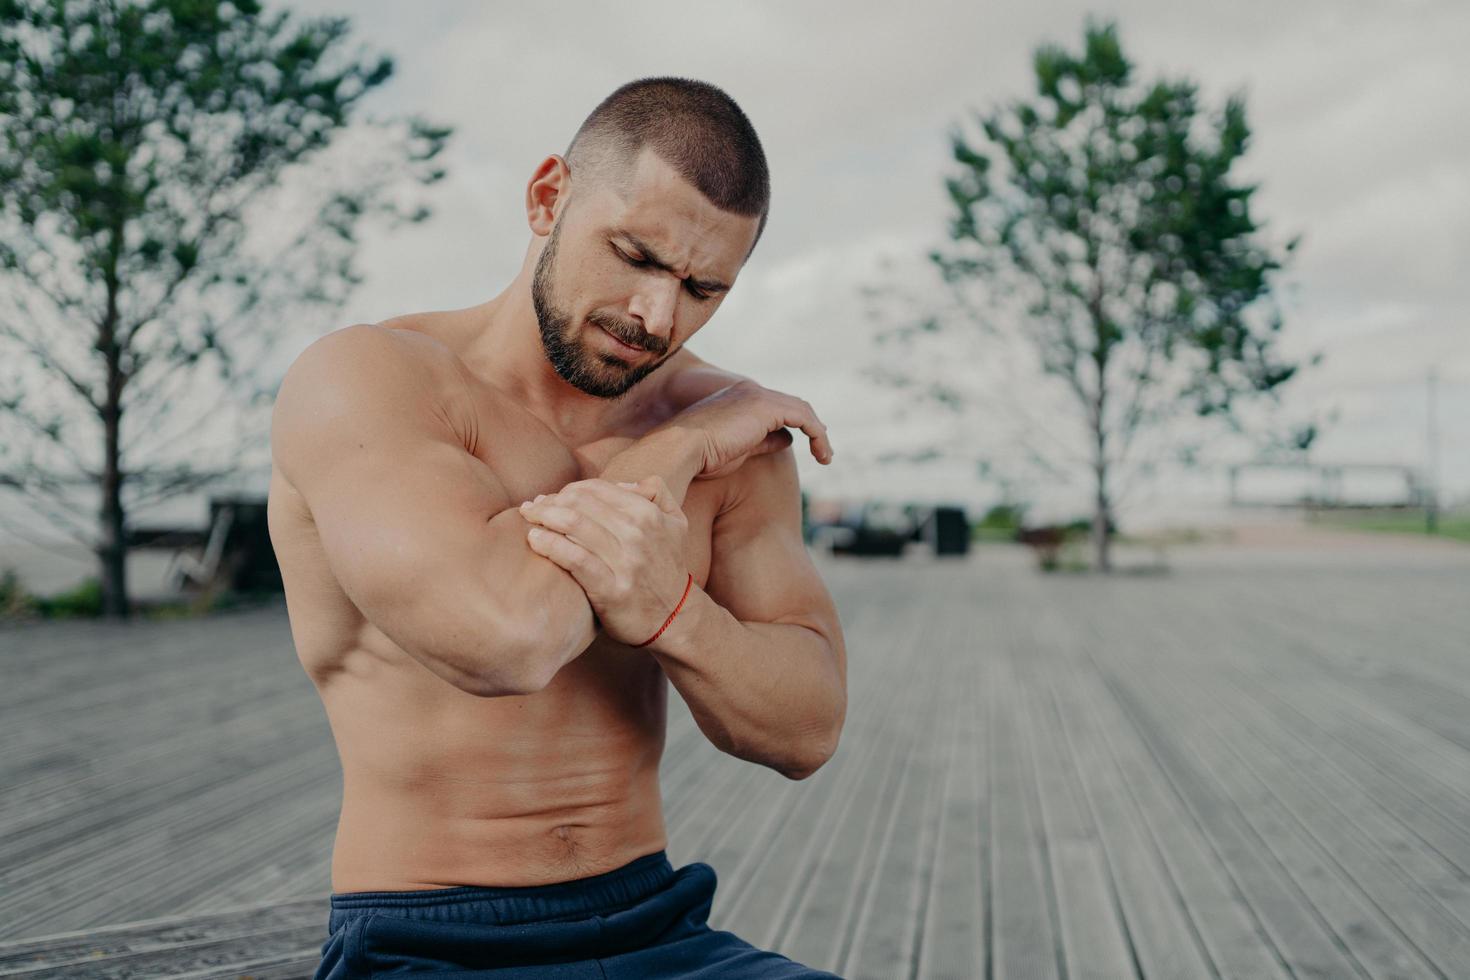 Outdoor shot of muscular guy injured elbow during physical exercises, feels strong pain and poses with naked torso. Health problems, medical, sickness and sport concept. Pain relief. Muscle injury photo